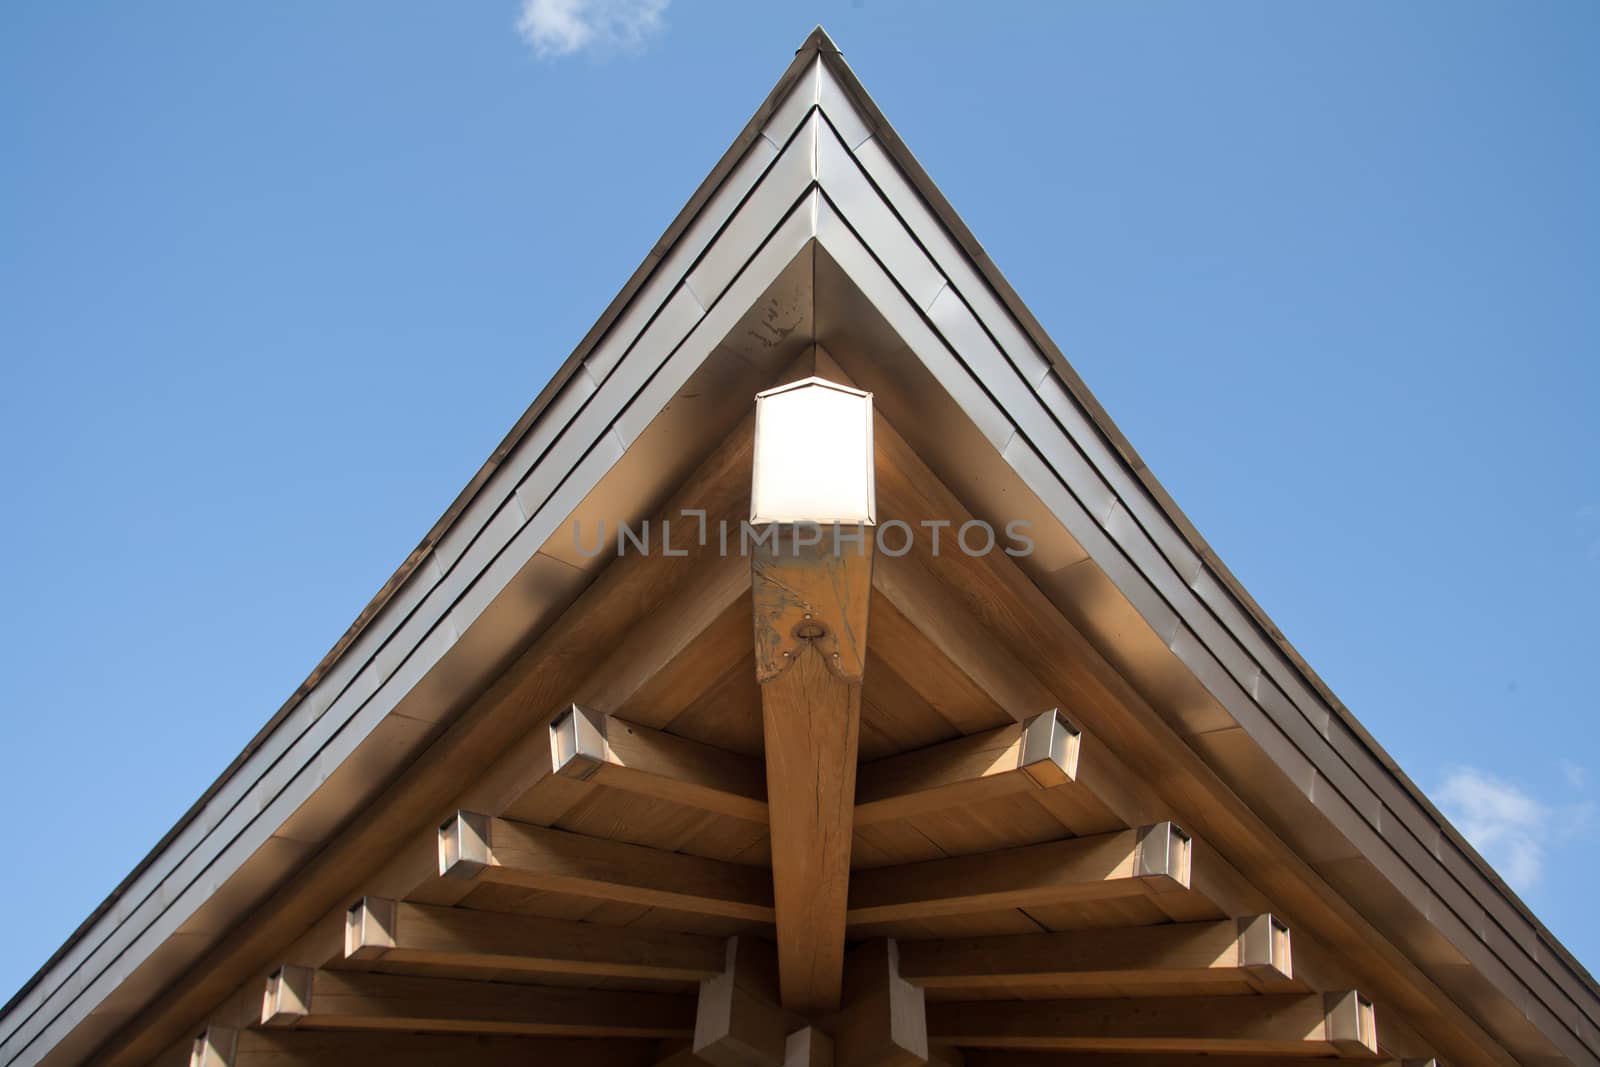 Detail of the very complex Japanese temple roof